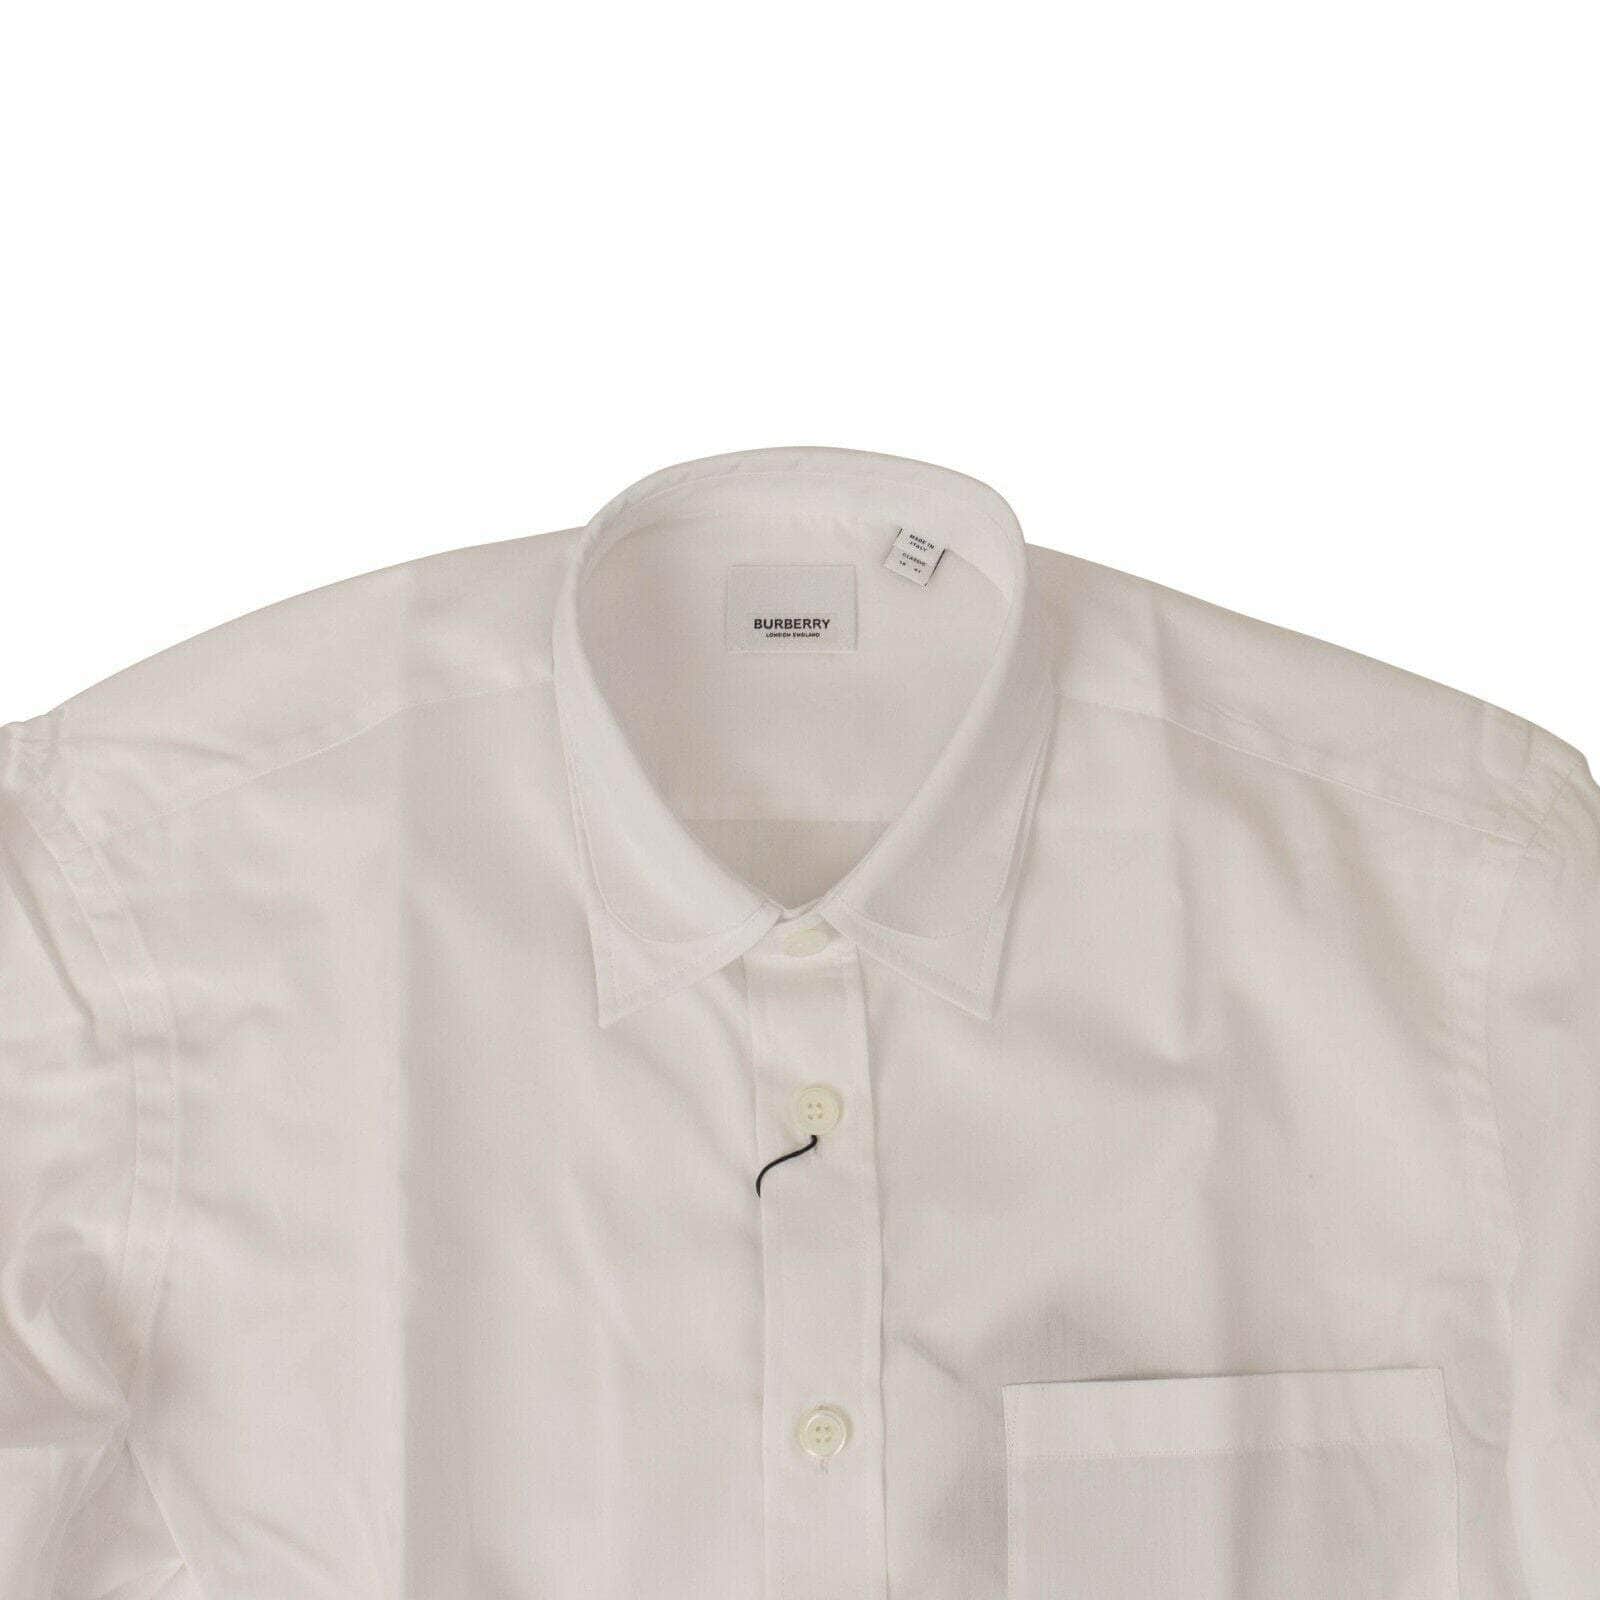 Burberry 250-500, burberry, channelenable-all, chicmi, couponcollection, gender-mens, main-clothing, newarrival2, size-38-eu, size-39-eu, size-41-eu Burberry Men's White Double Collar Shirt